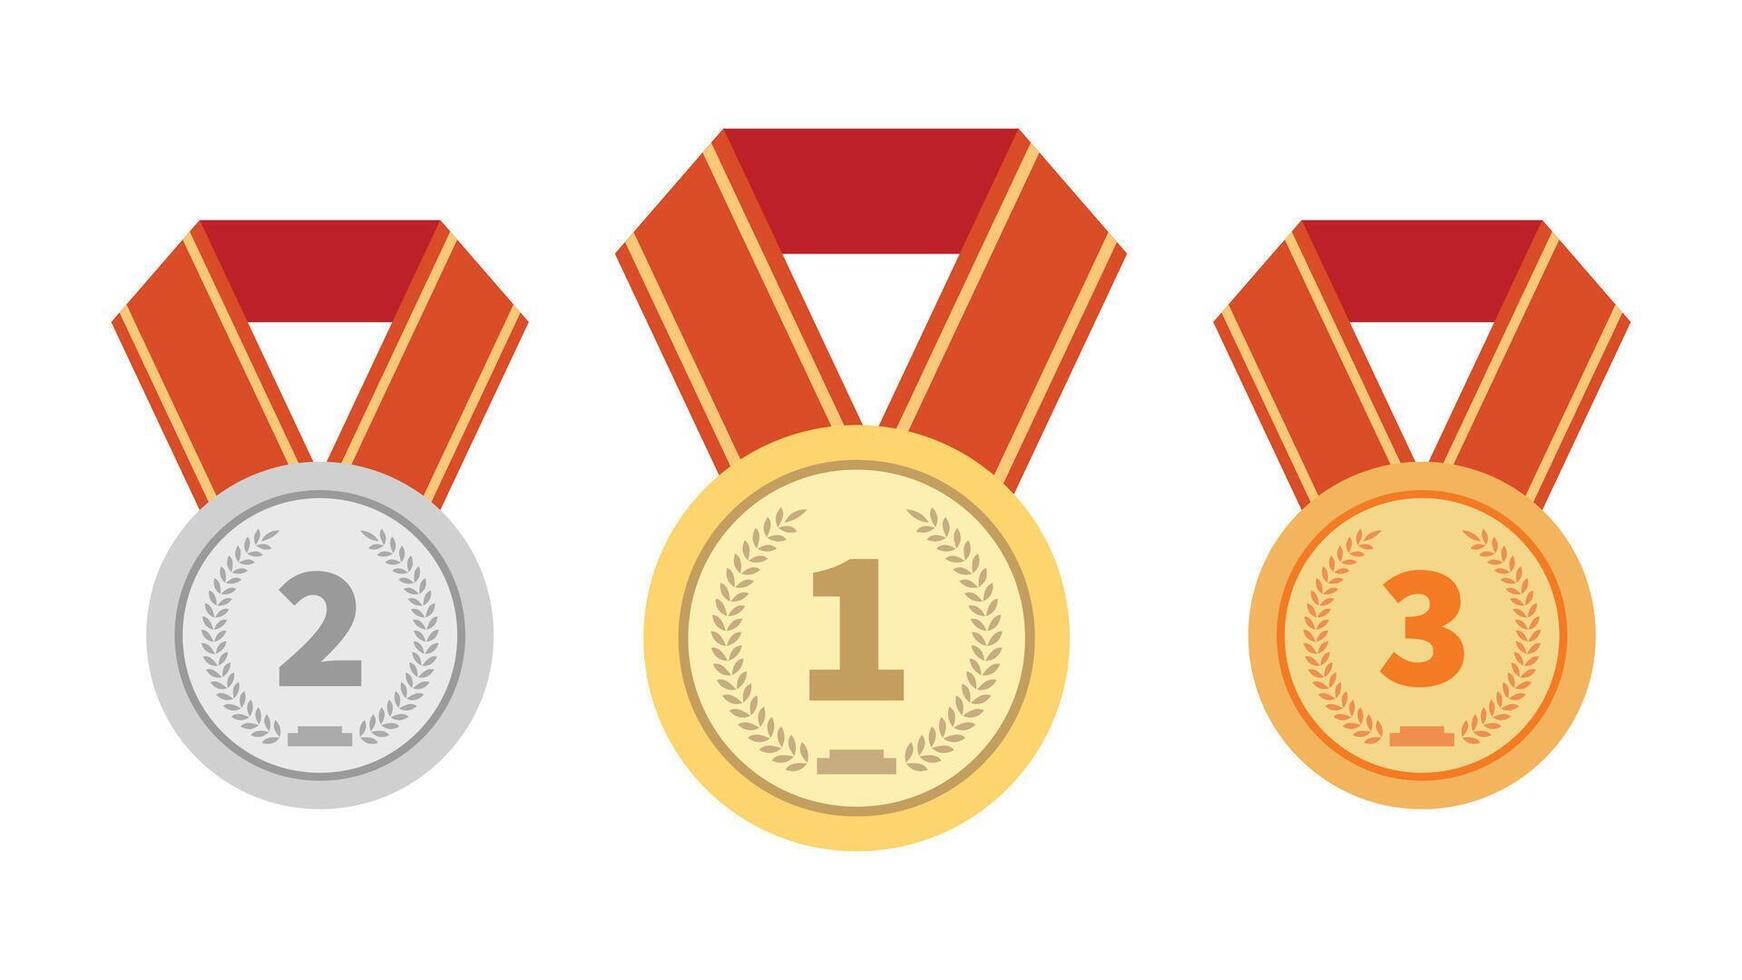 Set of medals tied with red ribbons, gold, silver and bronze medals vector